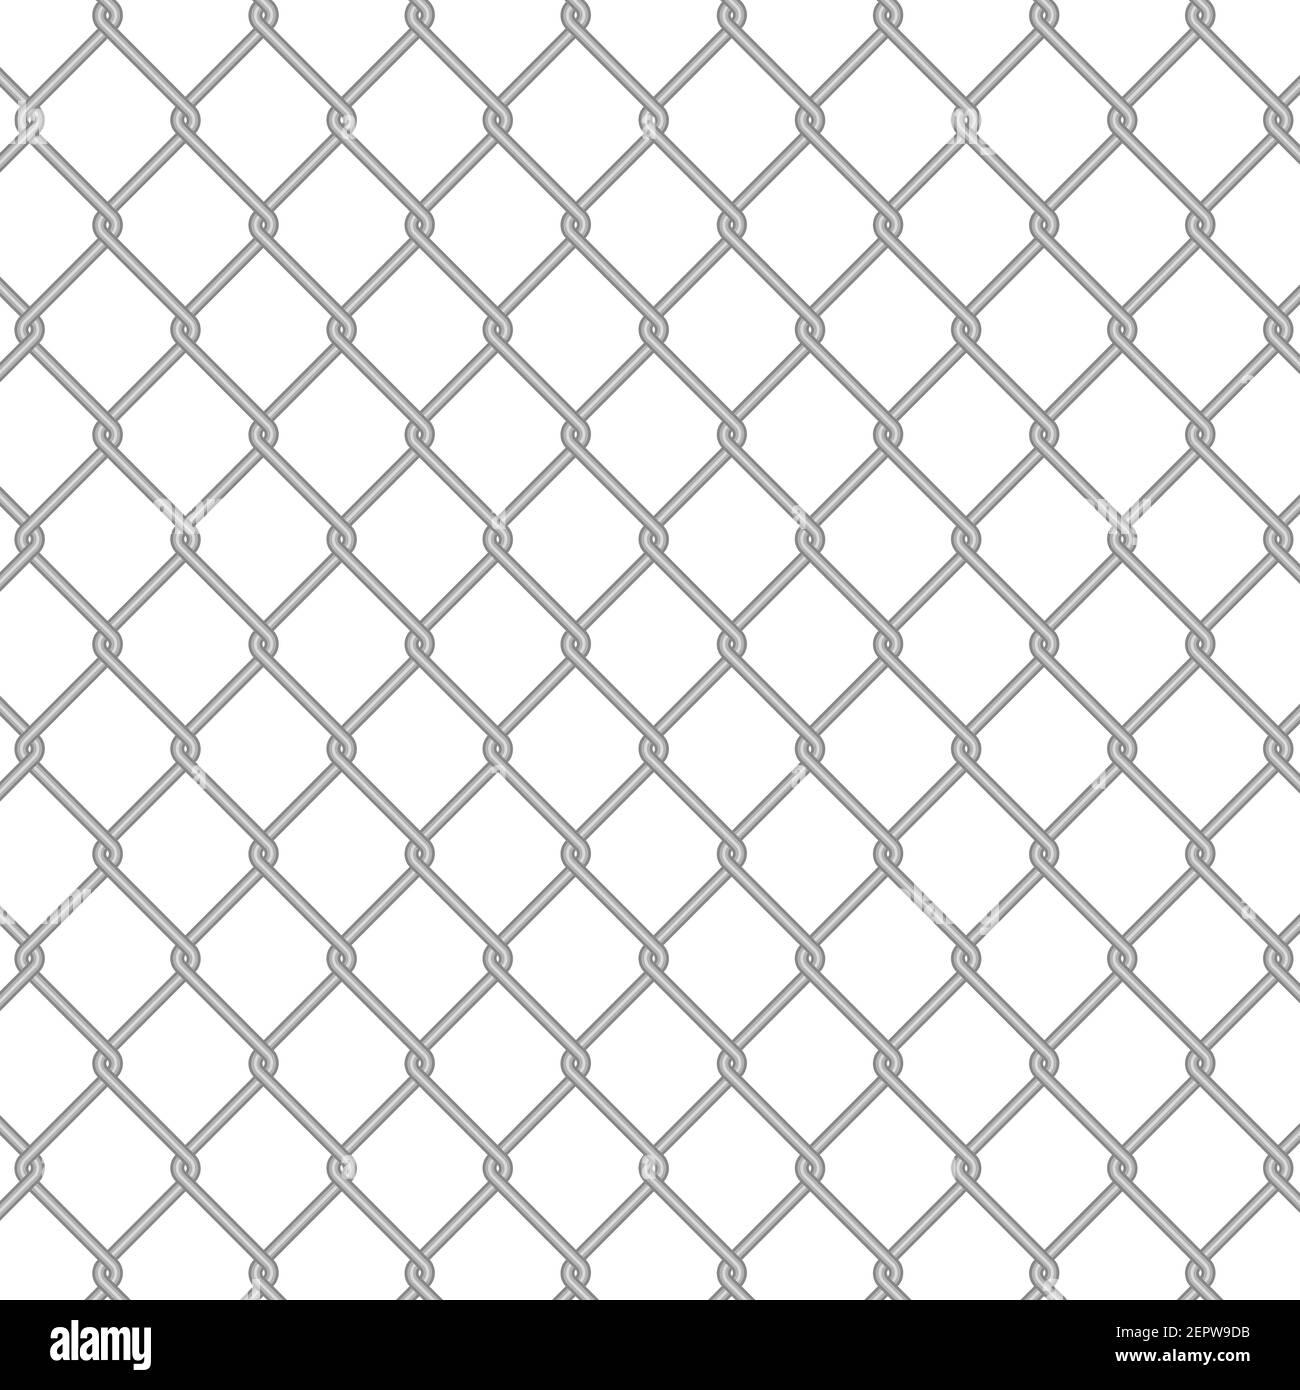 Chain link fence wire mesh steel metal. Fence section. 3D vector illustration isolated on white. Stock Vector